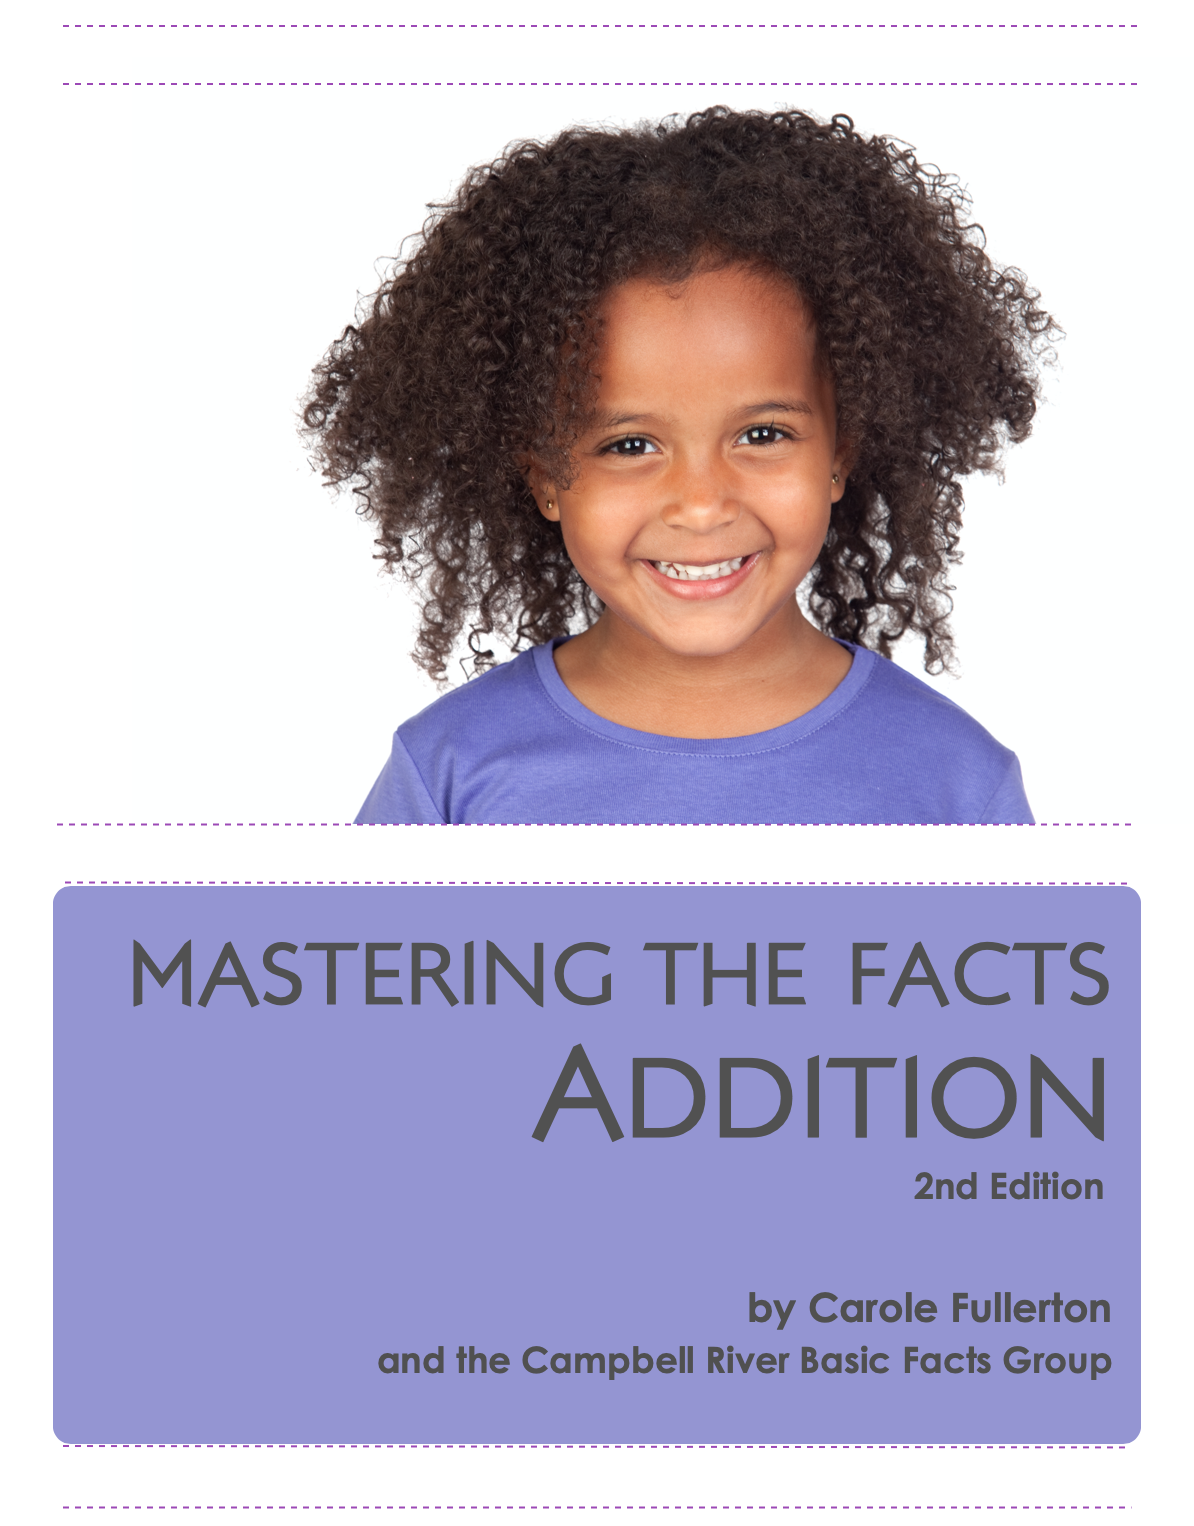 Mastering the Facts Addition 2nd ed cover